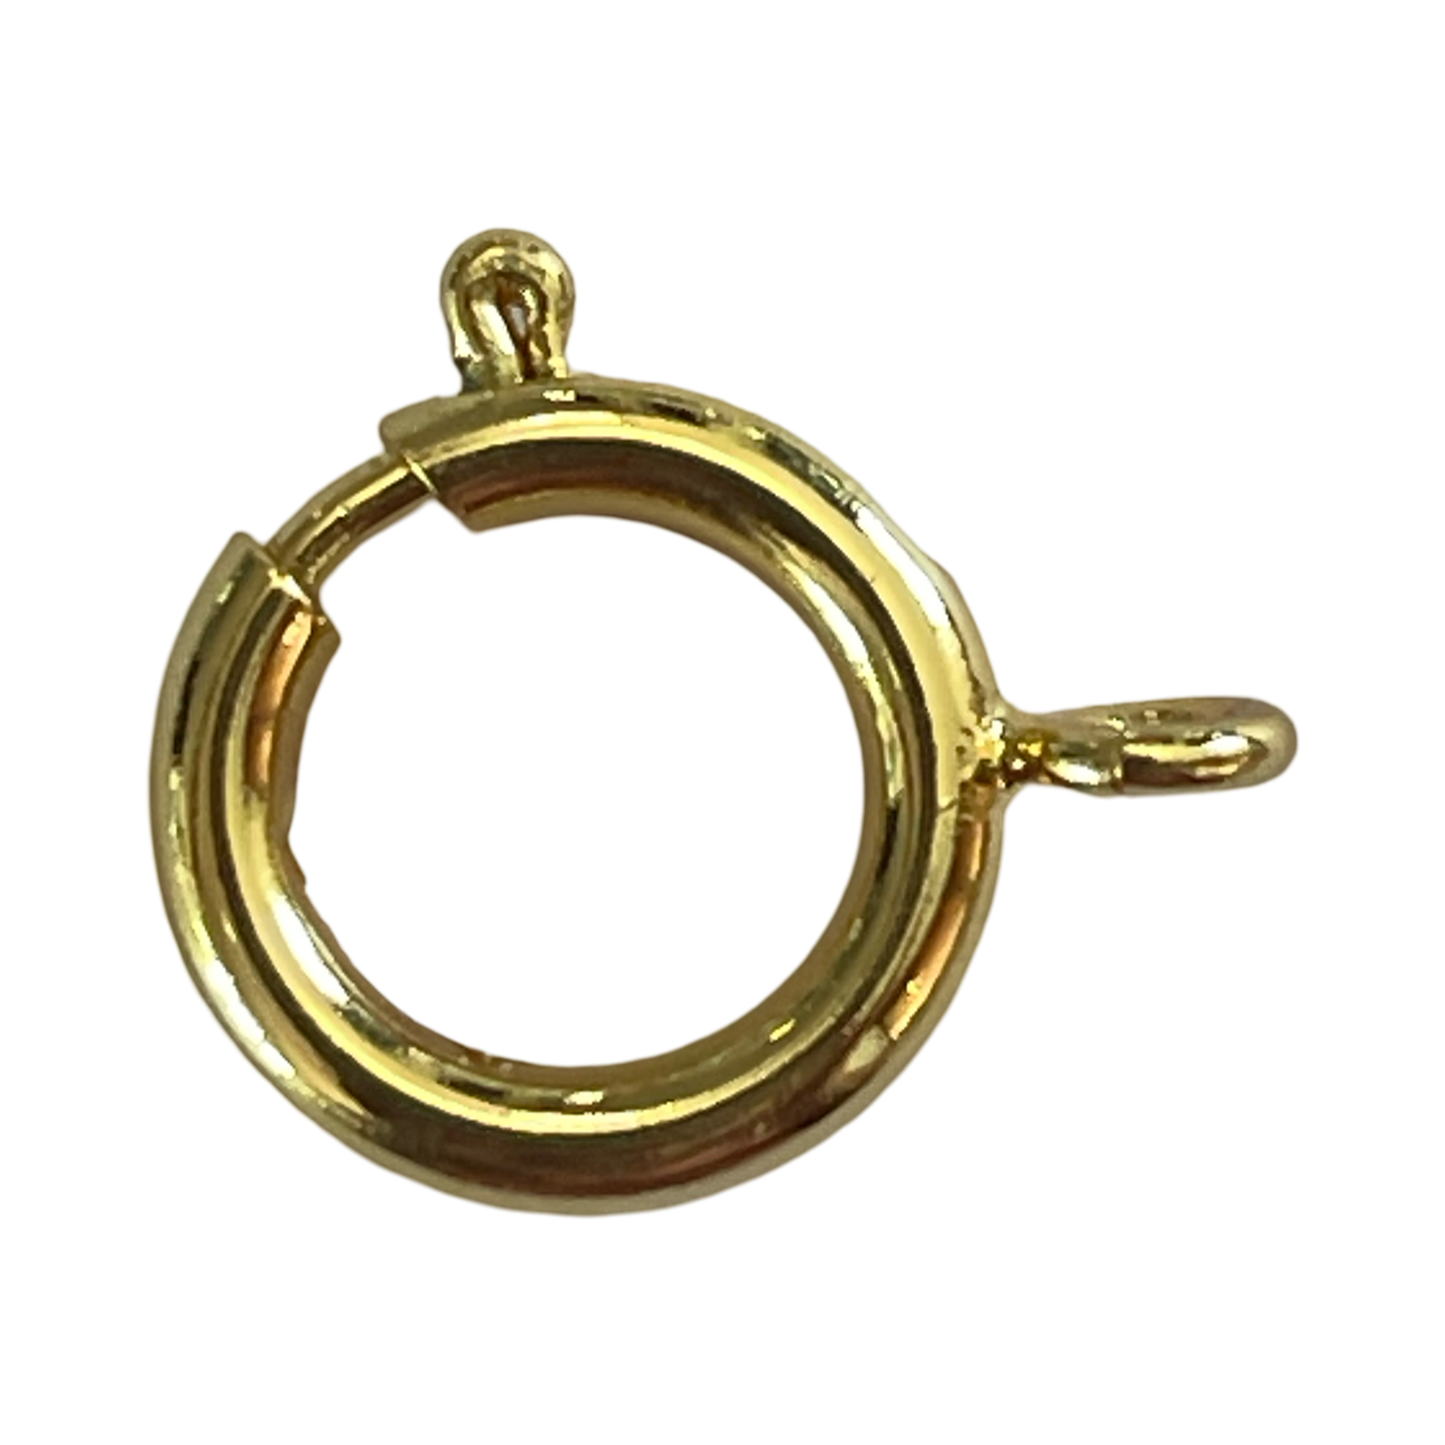 RING CLASP 19MM GOLD PLATE 18KT 1 PC